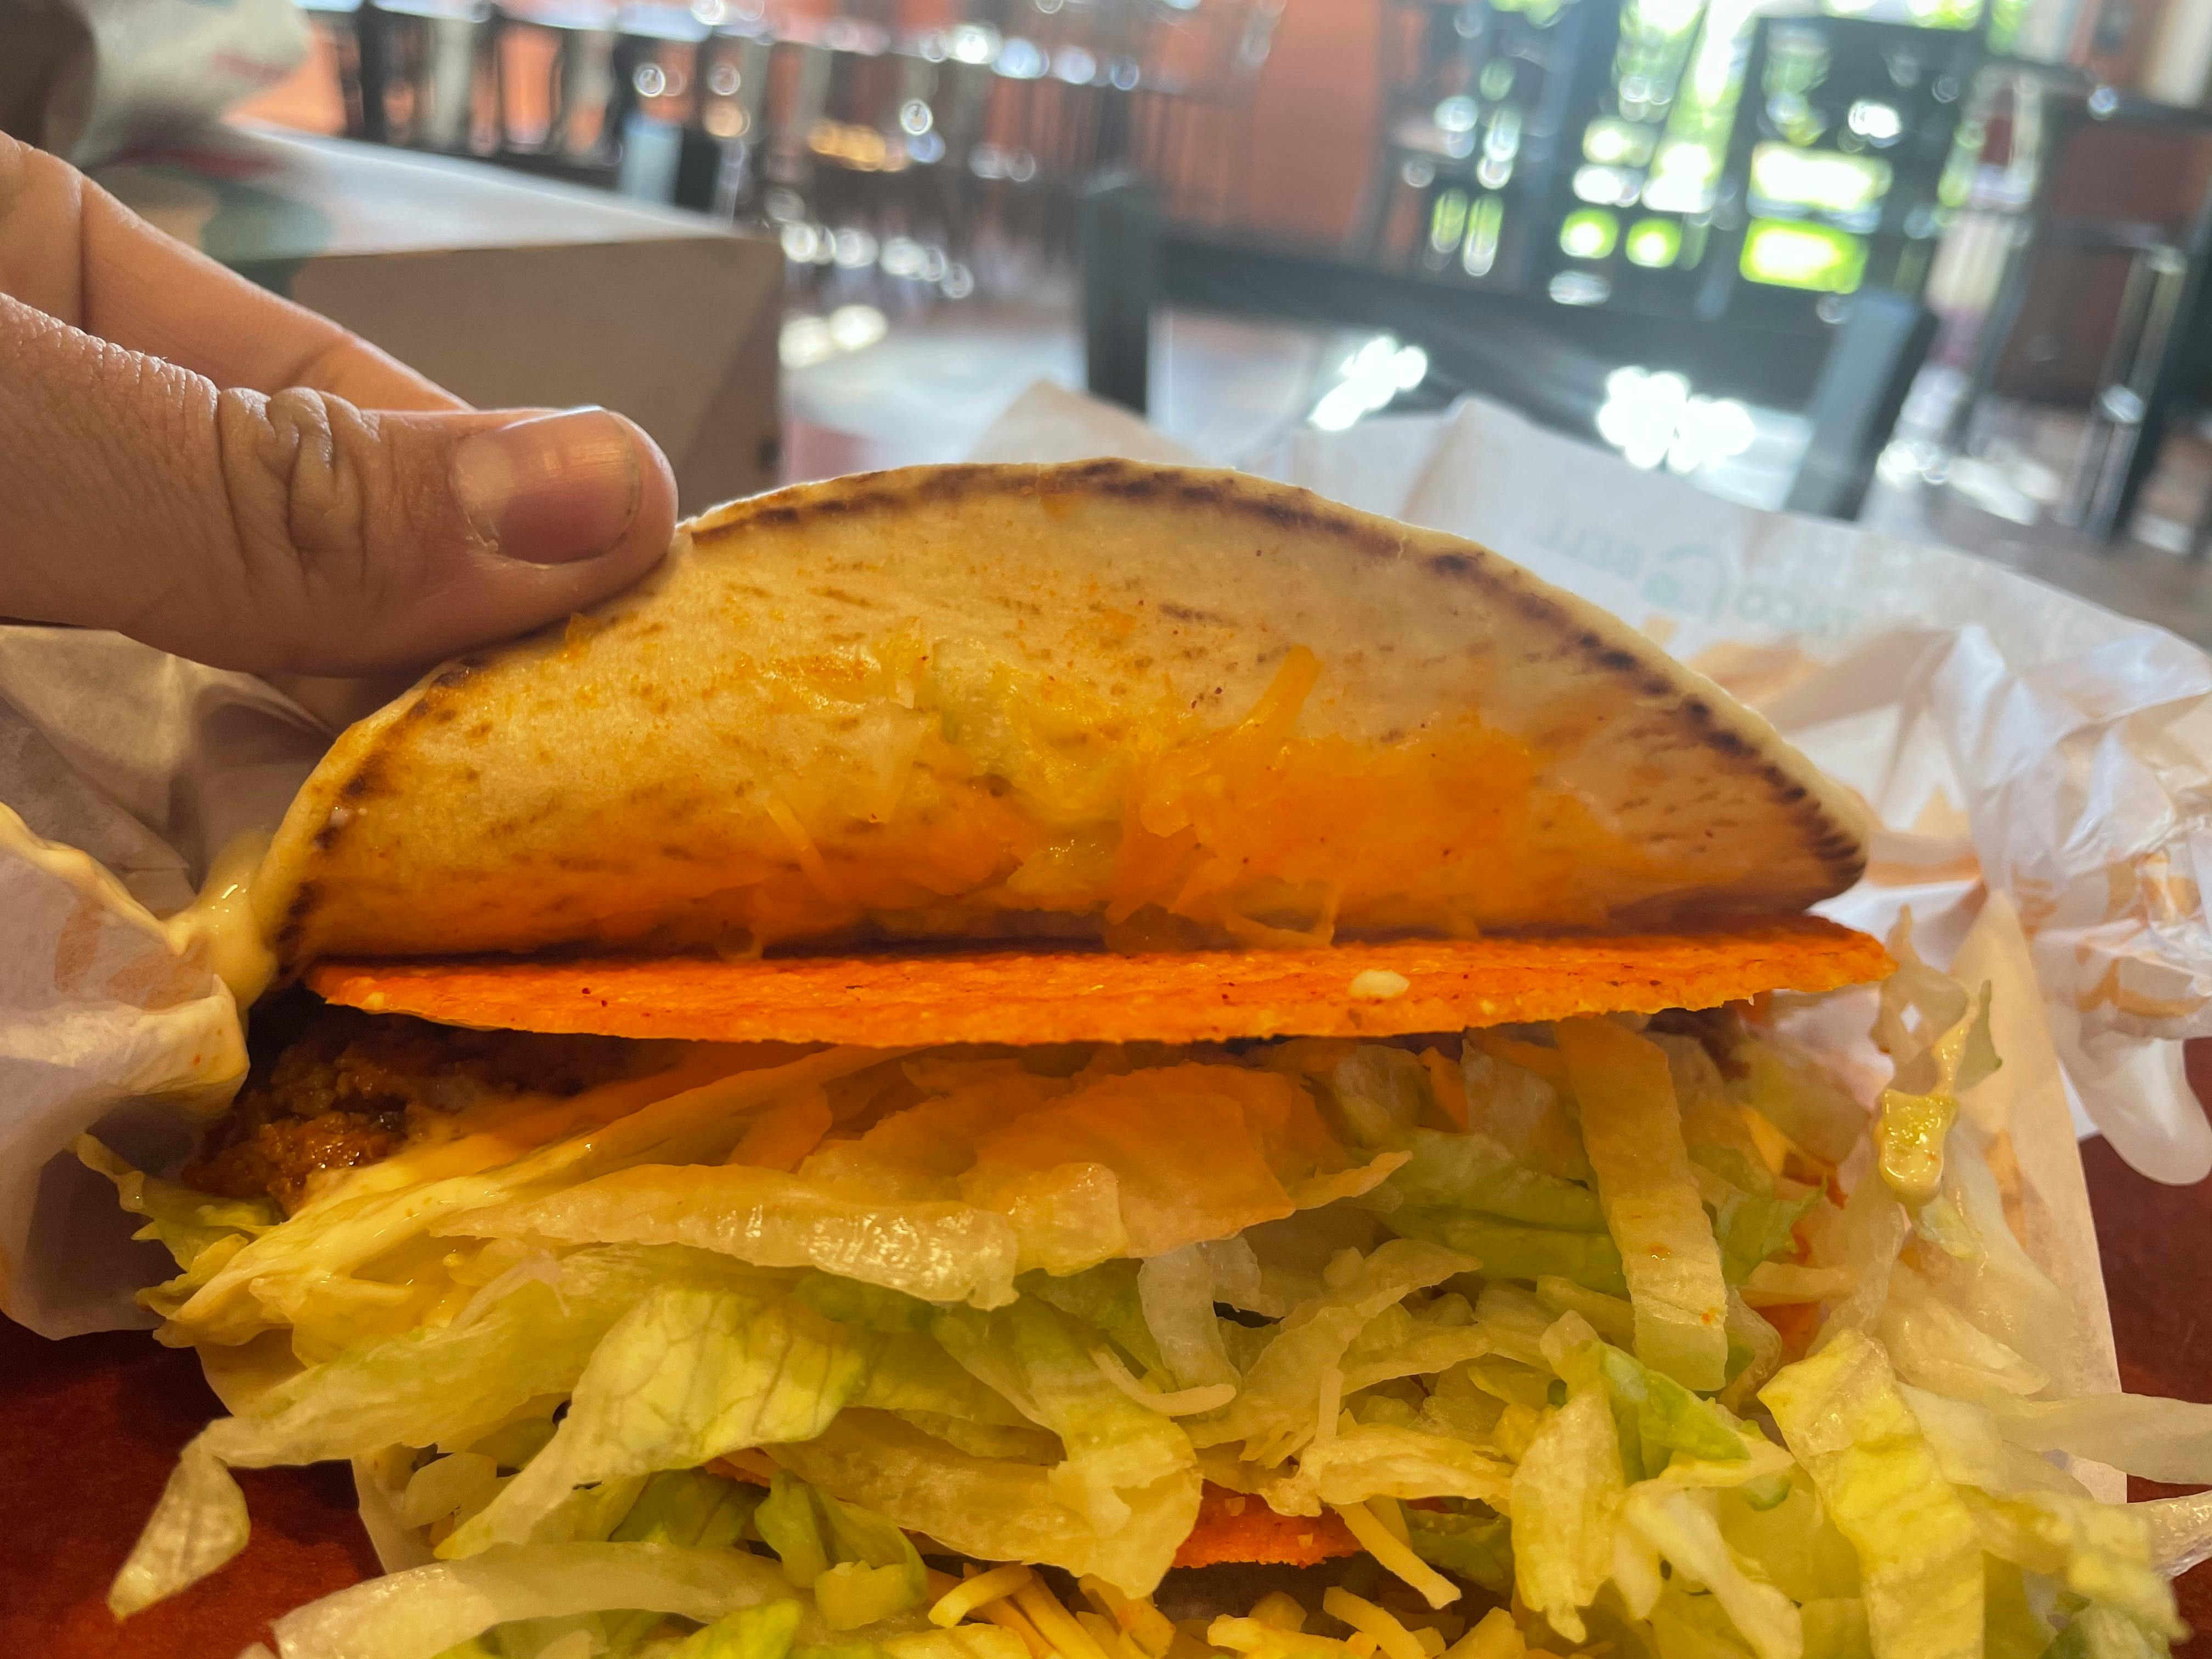 A person's hand lifting a tortilla of a Taco Bell taco to reveal a Dorito shell inside.